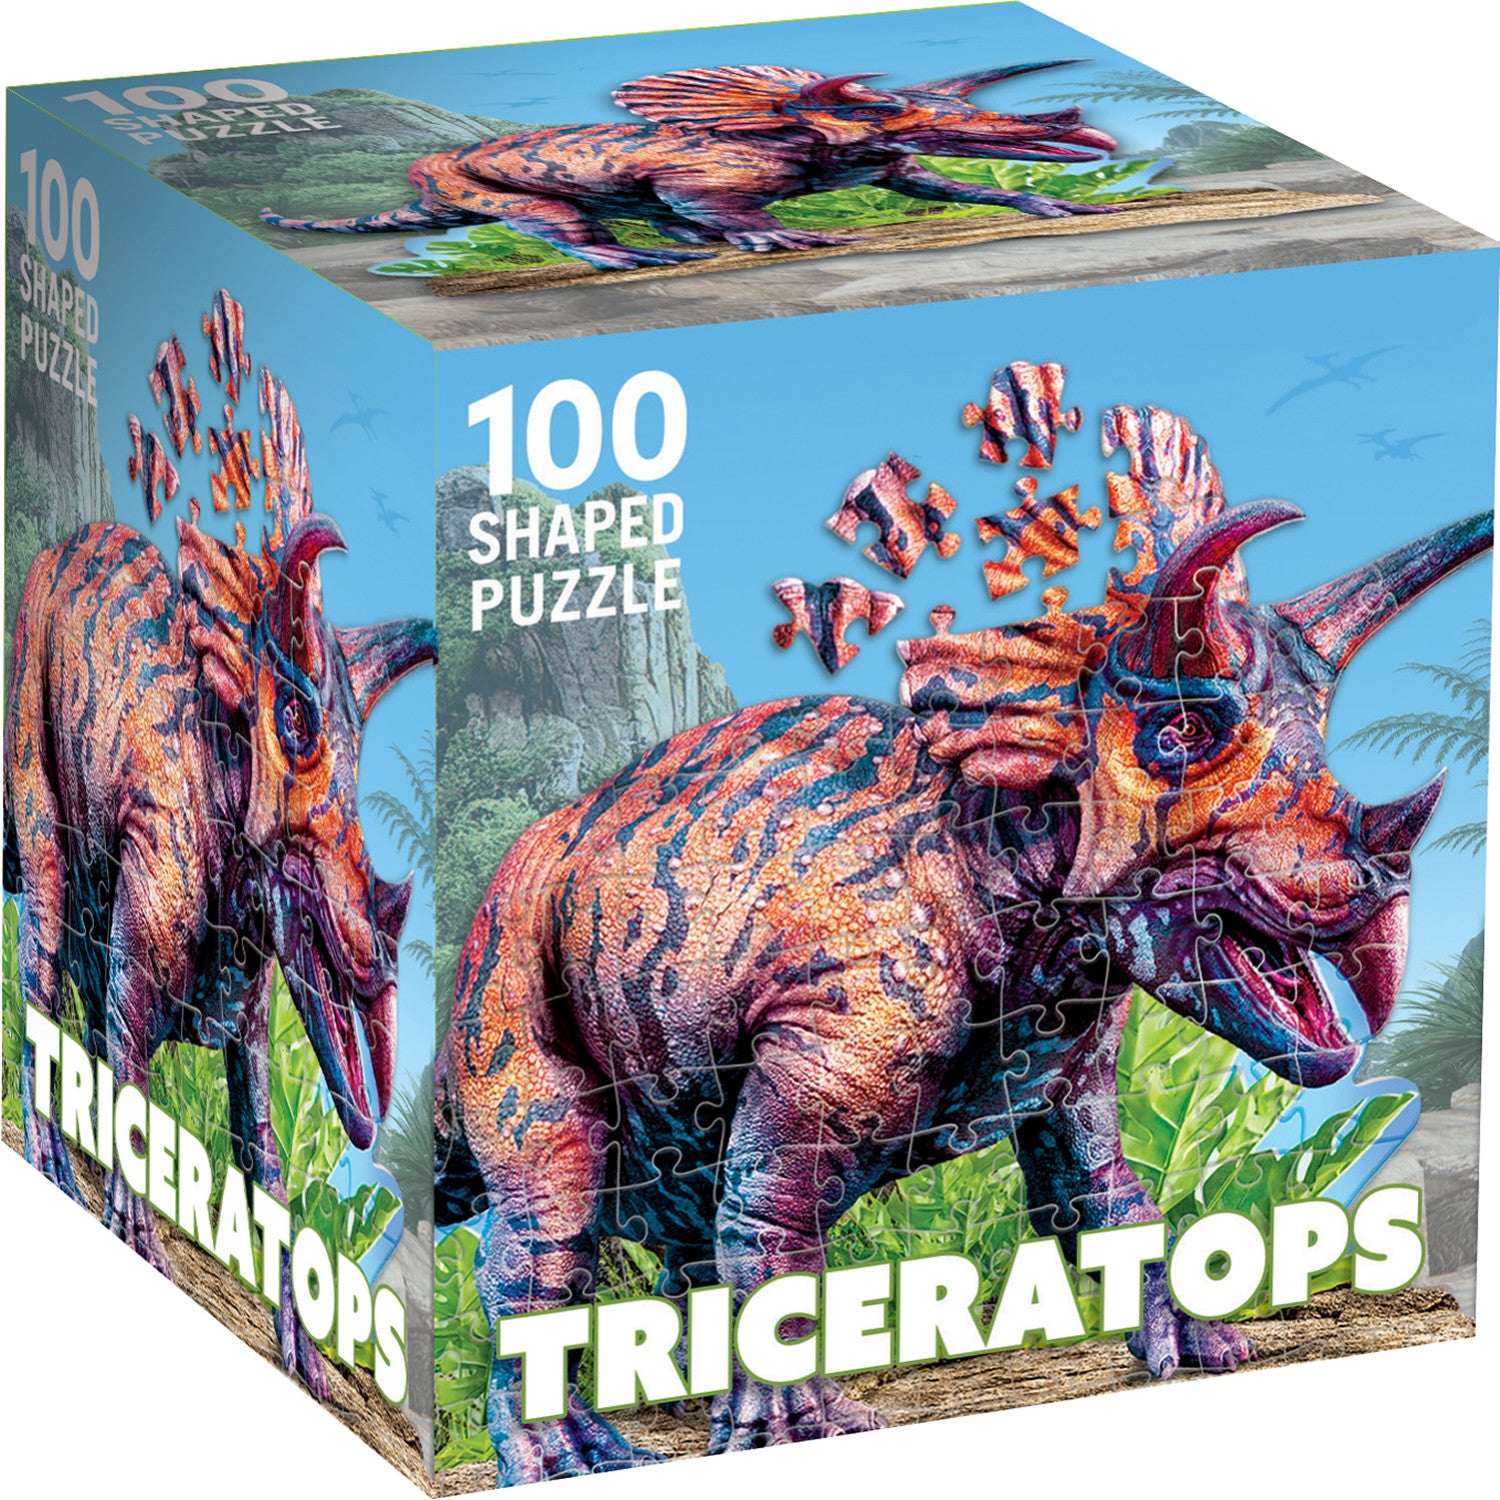 Triceratops 100 Piece Shaped Jigsaw Puzzle